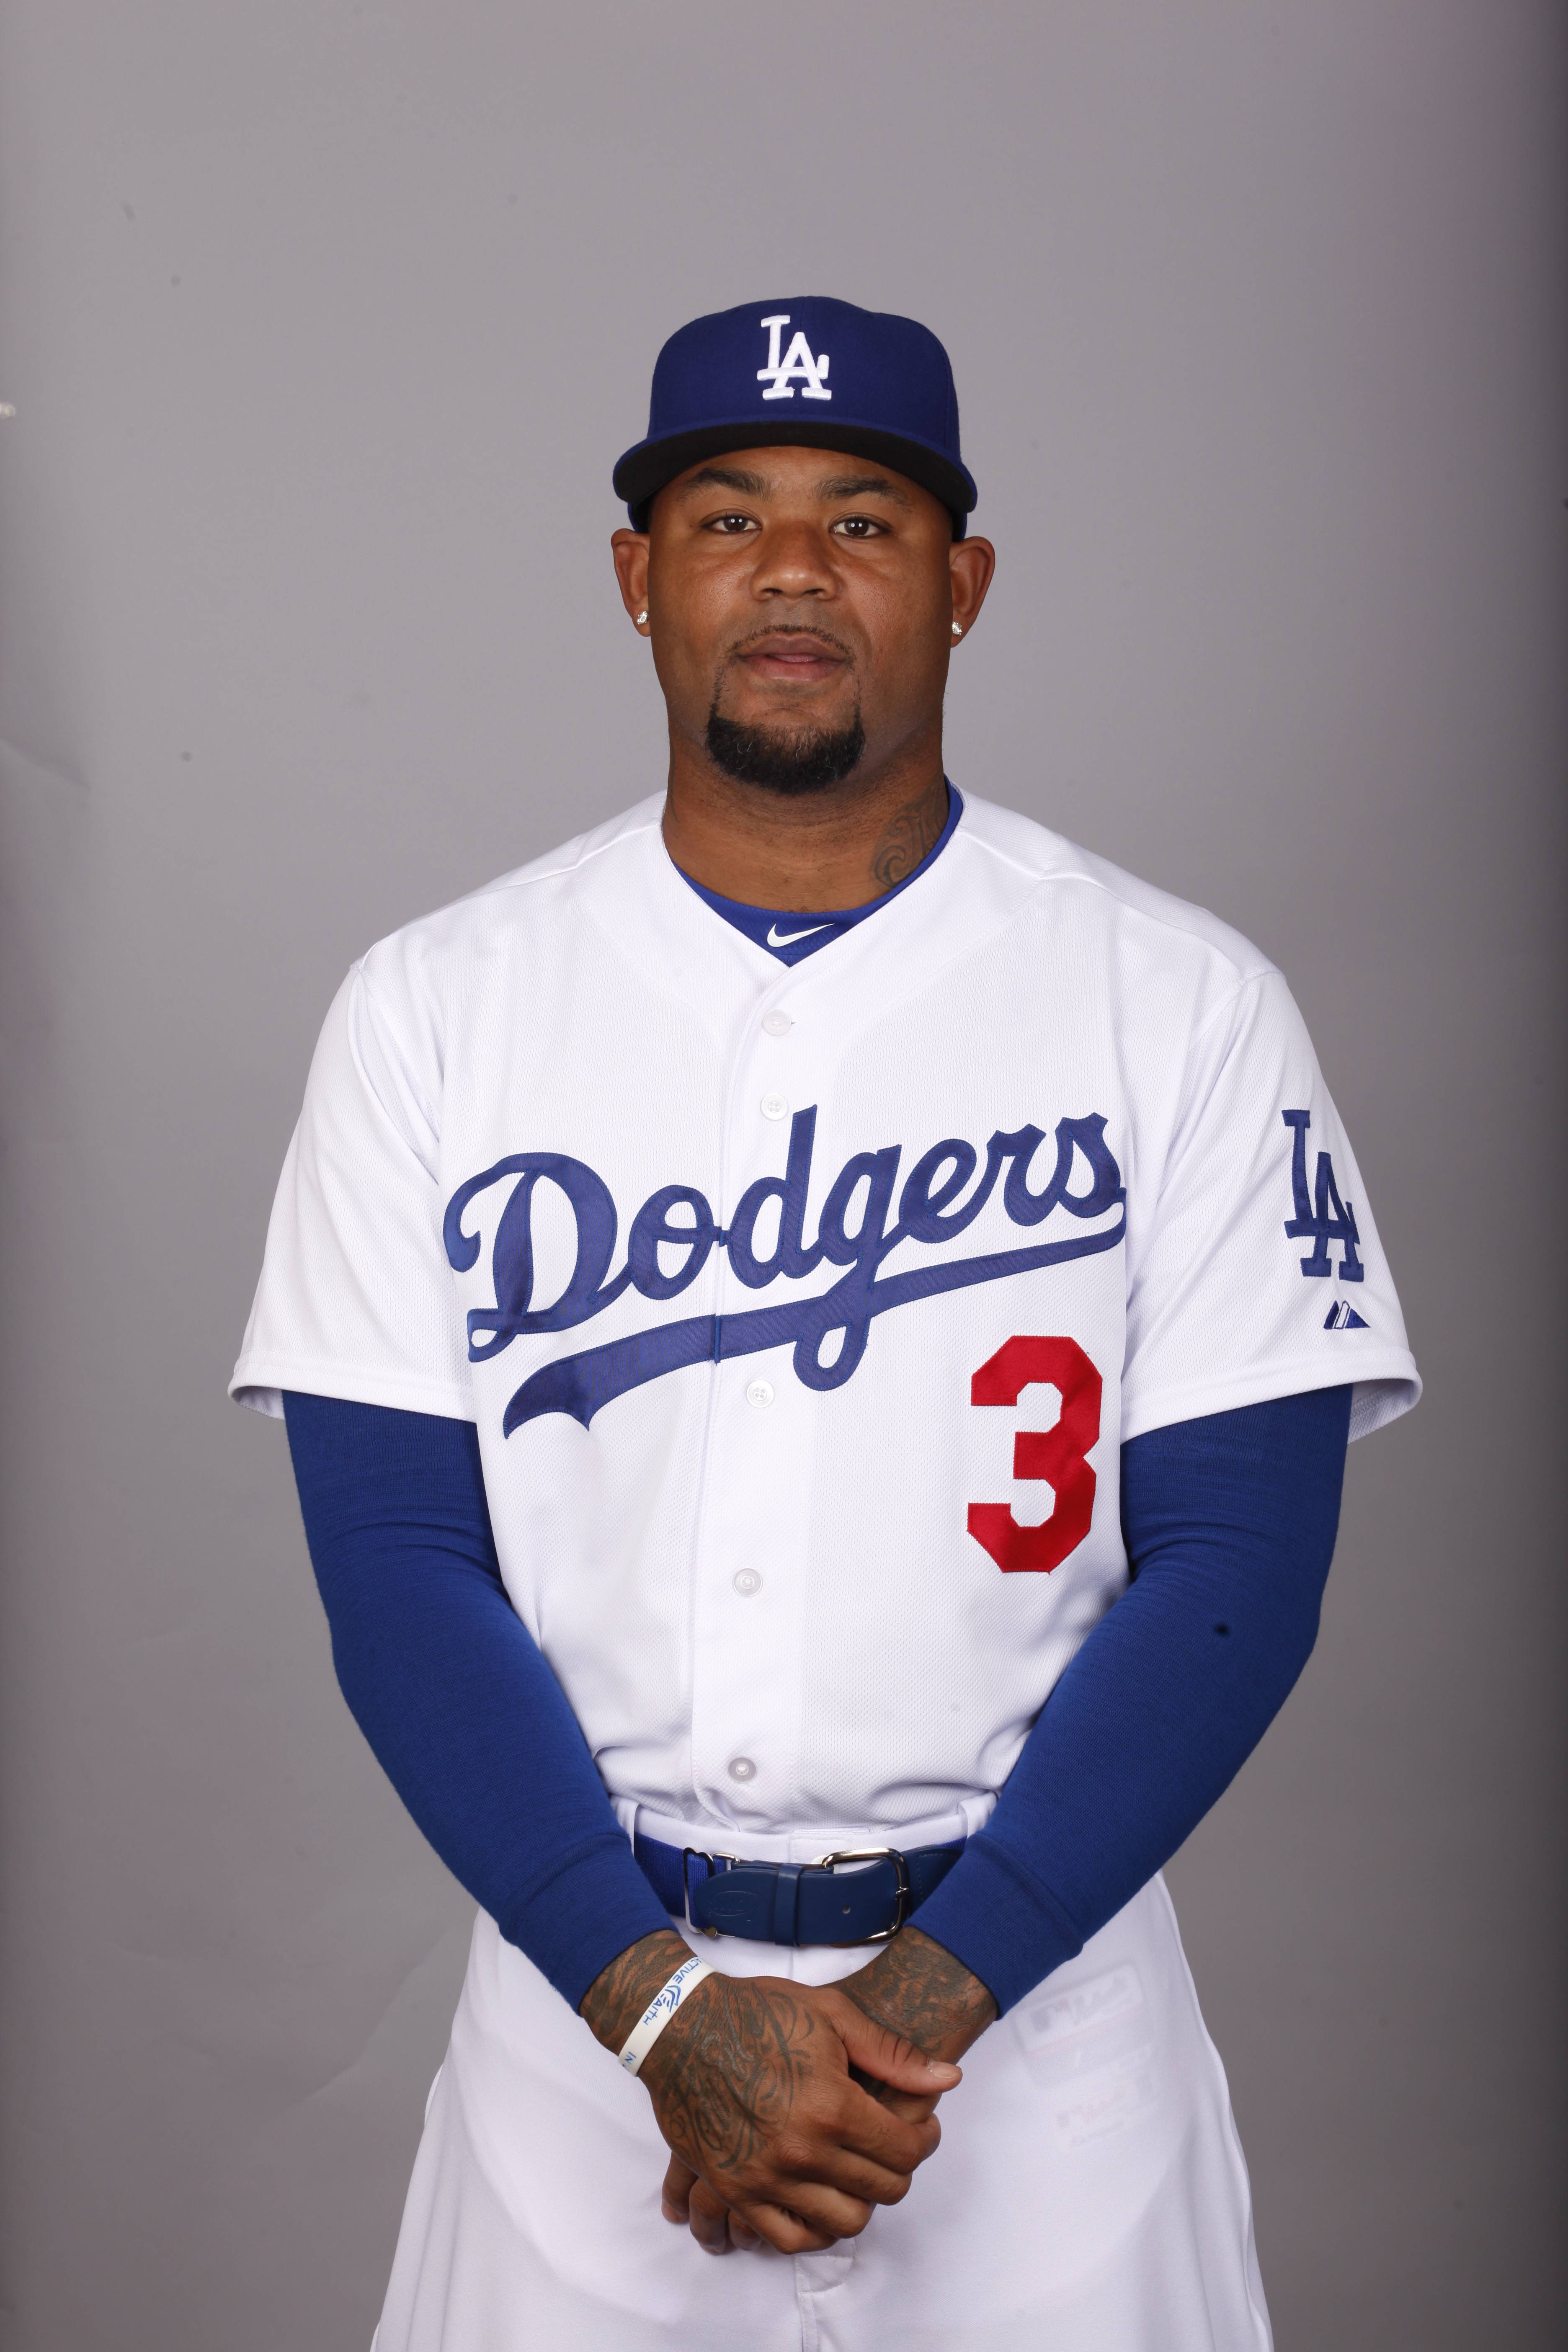 Carl Crawford - A Child & Woman Drown At Former MLB Player's Home